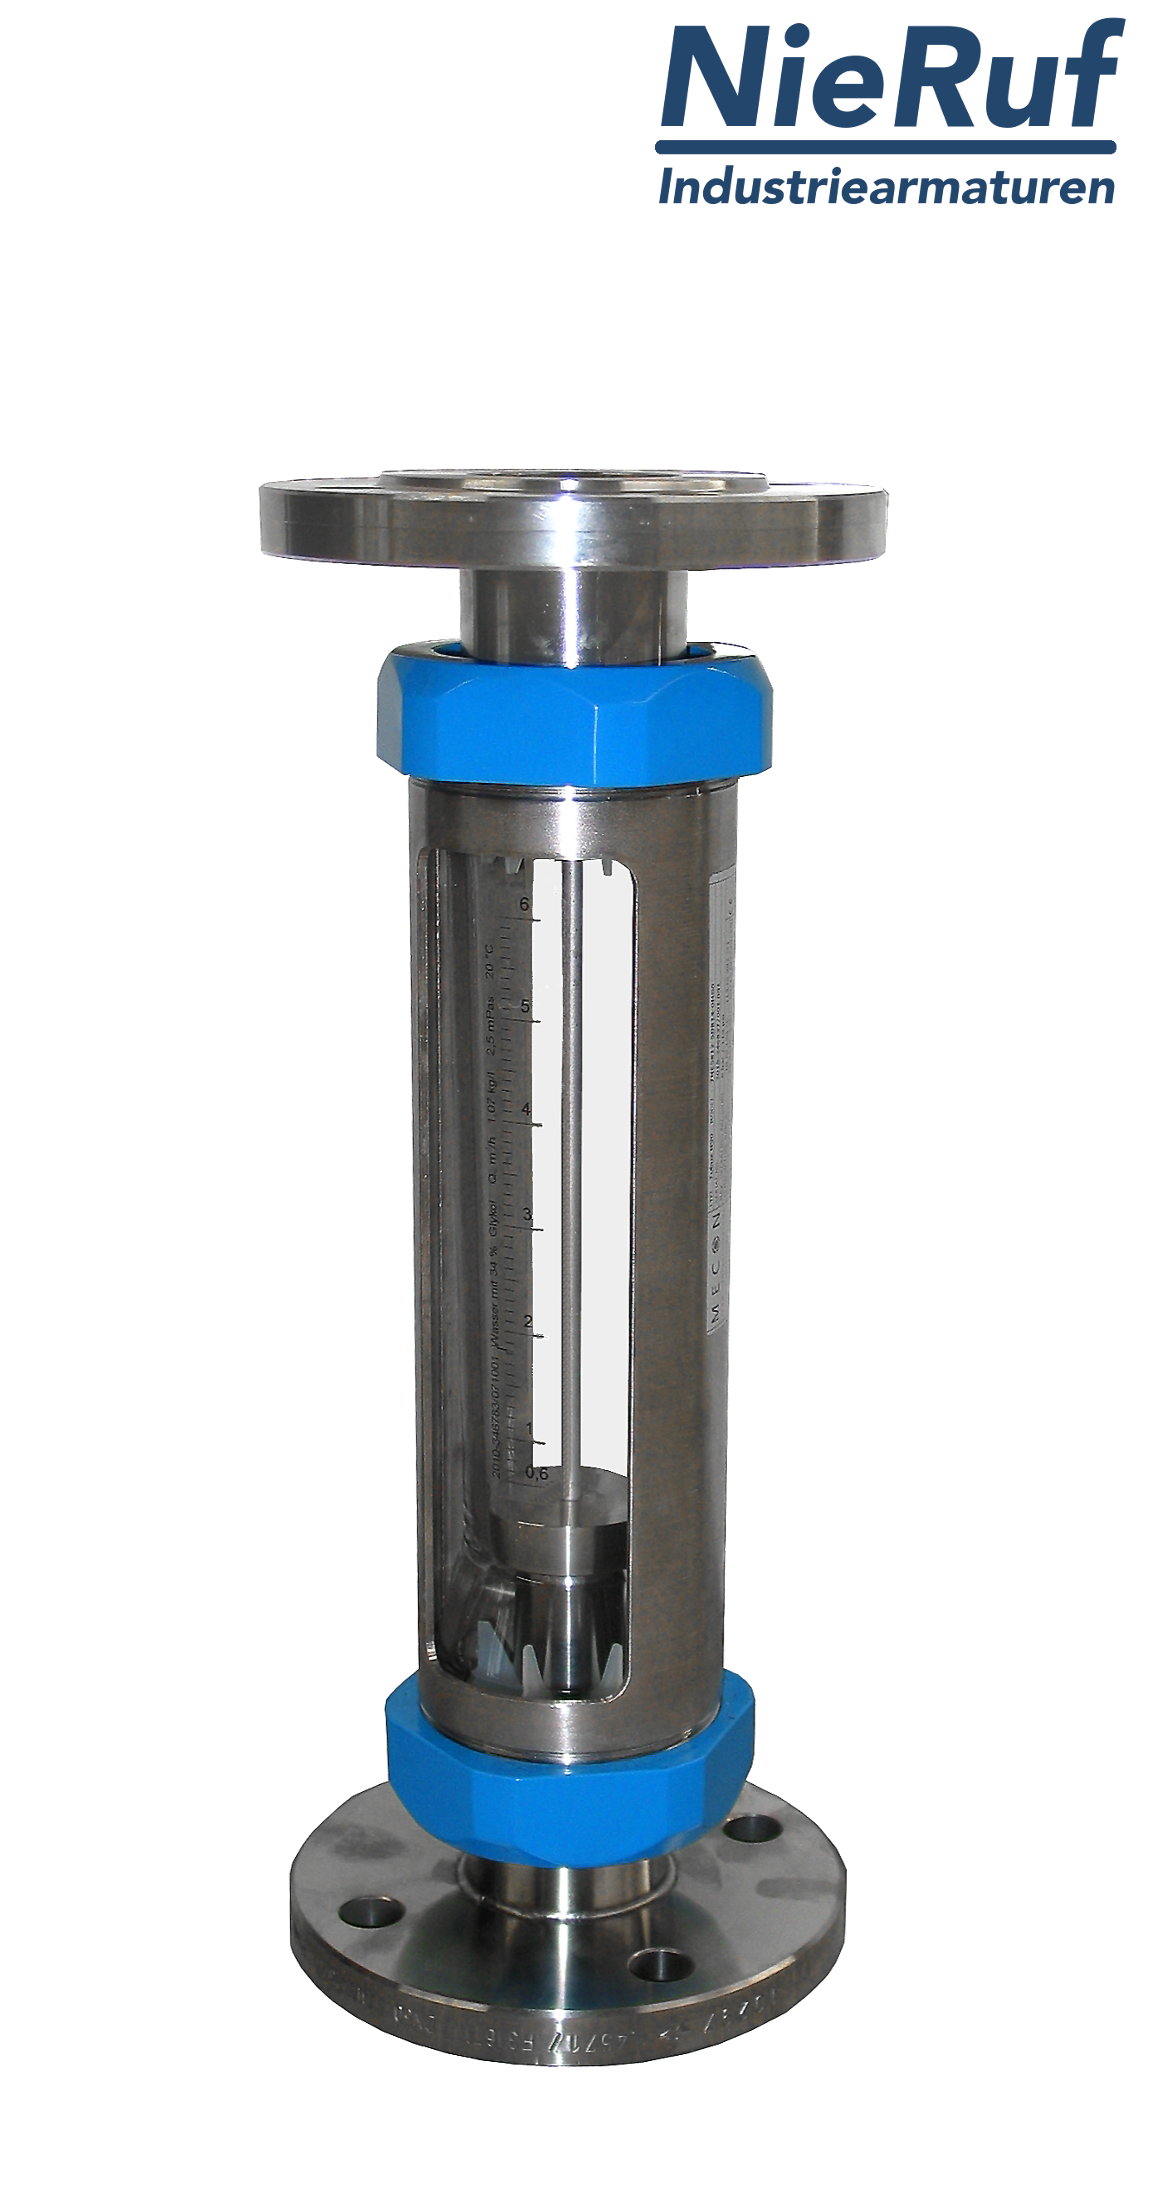 Variable area flowmeter stainless steel + borosilicate flange DN15 0.5 - 5.0 l/h water FKM